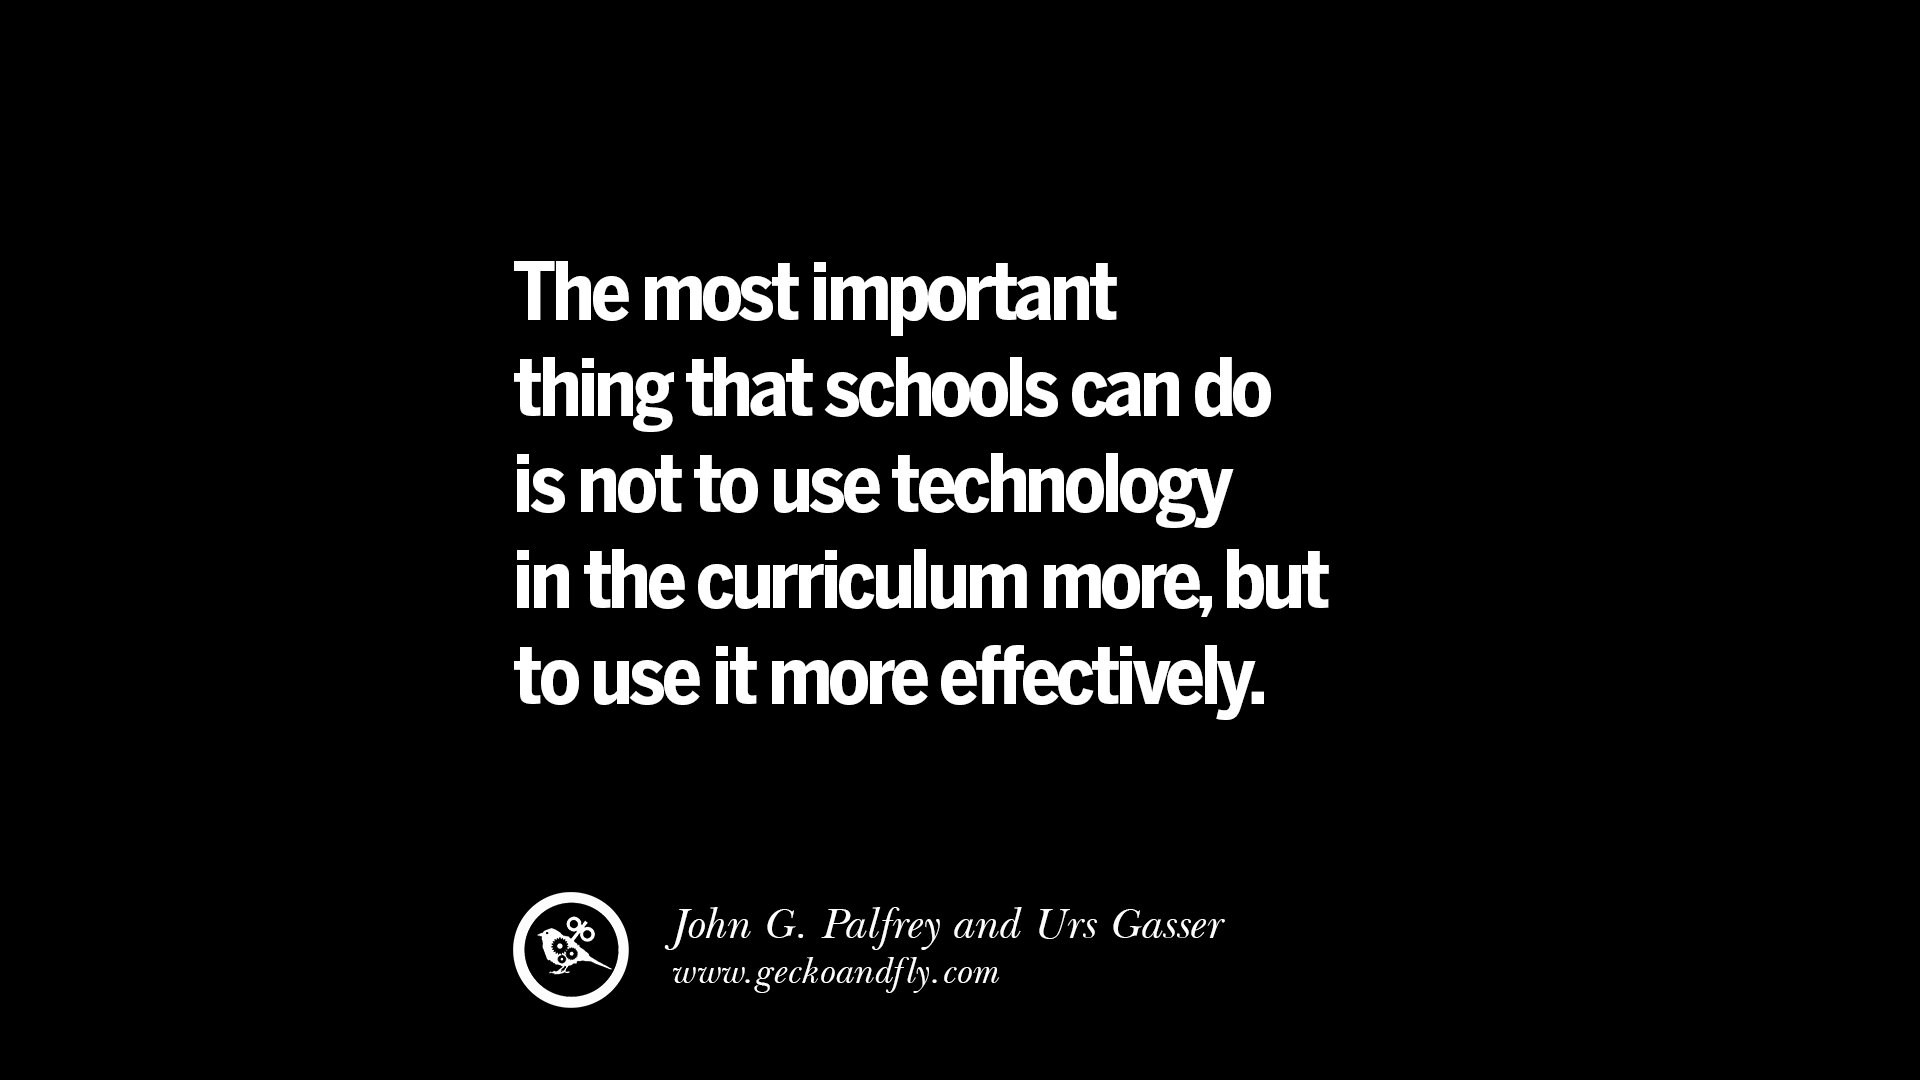 Quote About Technology In Education
 Quotes on Education The most important thing that schools